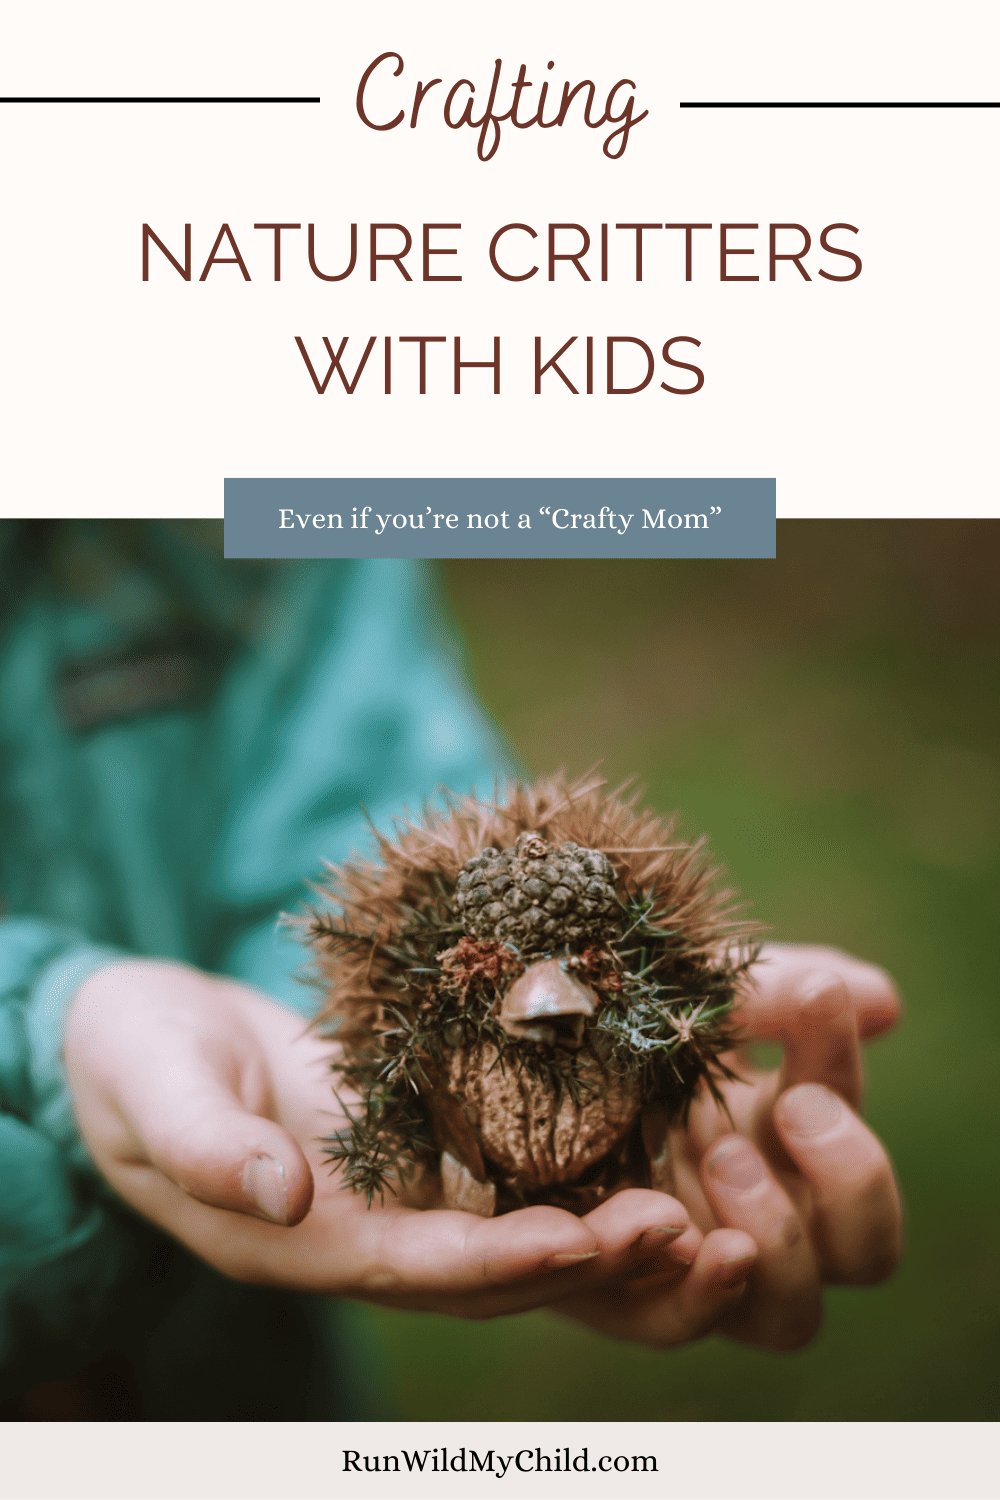 Crafting with kids using found natural materials 